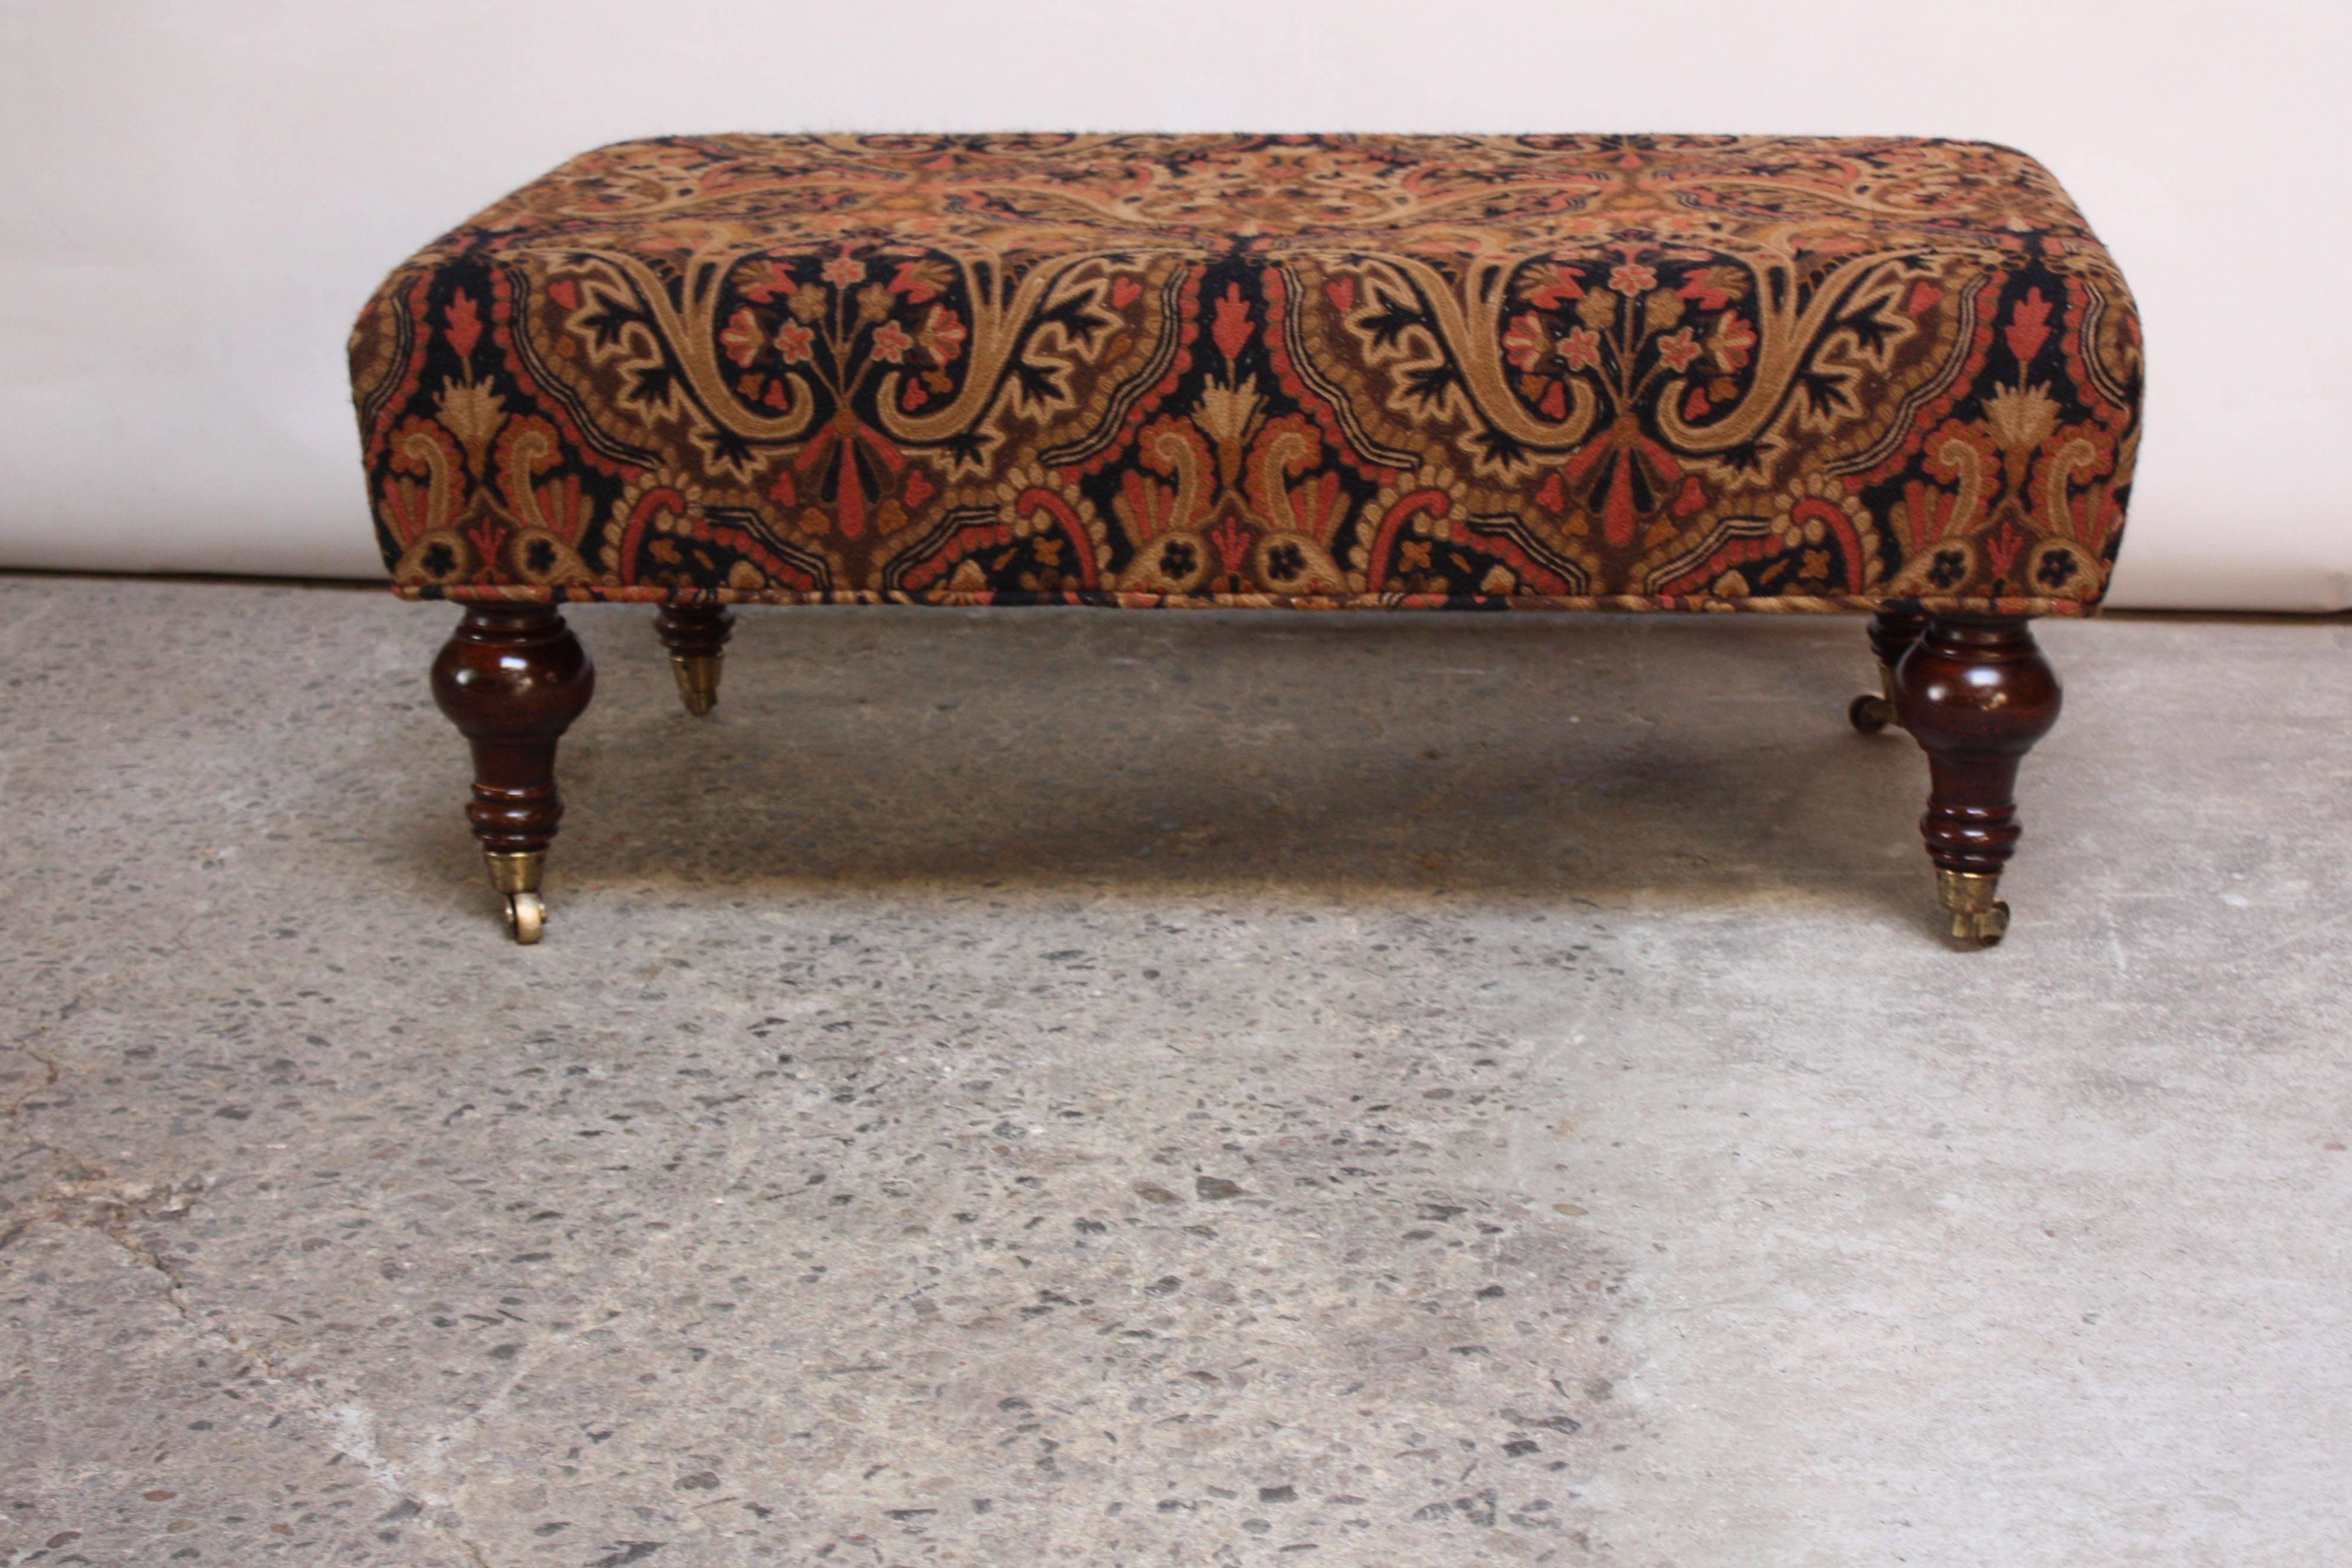 This George Smith ottoman's original upholsetery has been replaced with a vintage crewel fabric. The replacement textile, which bosts bold colors and ornate pattern work, stays true to the original form: George Smith's signature use of heavily